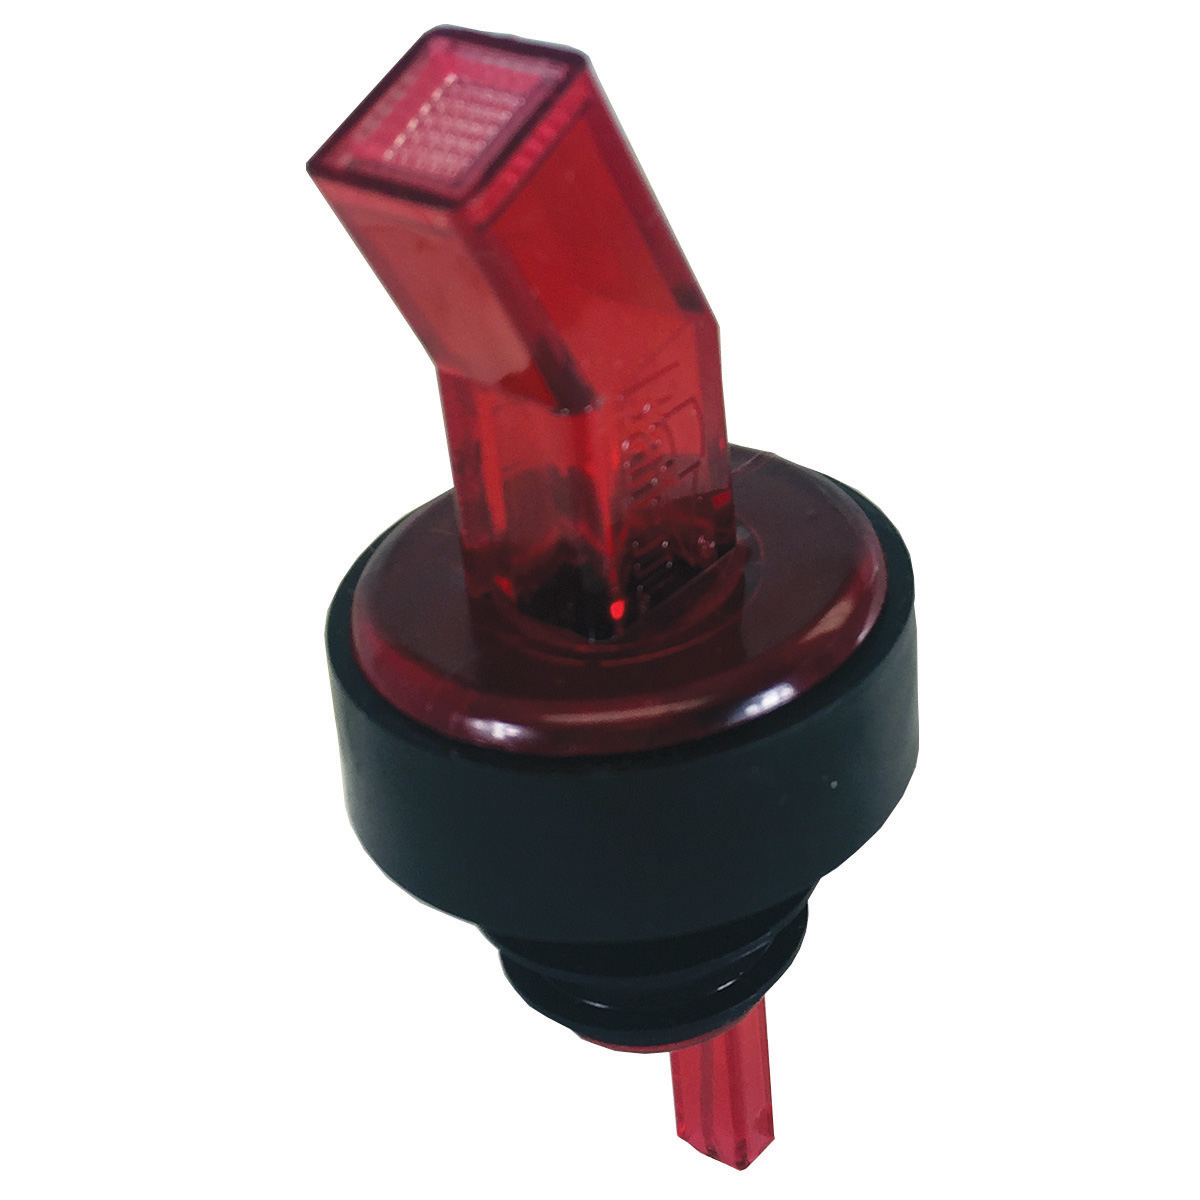 Spill-Stop 313-03 Ban-M Screened Pourer®, red with black collar, Made in USA